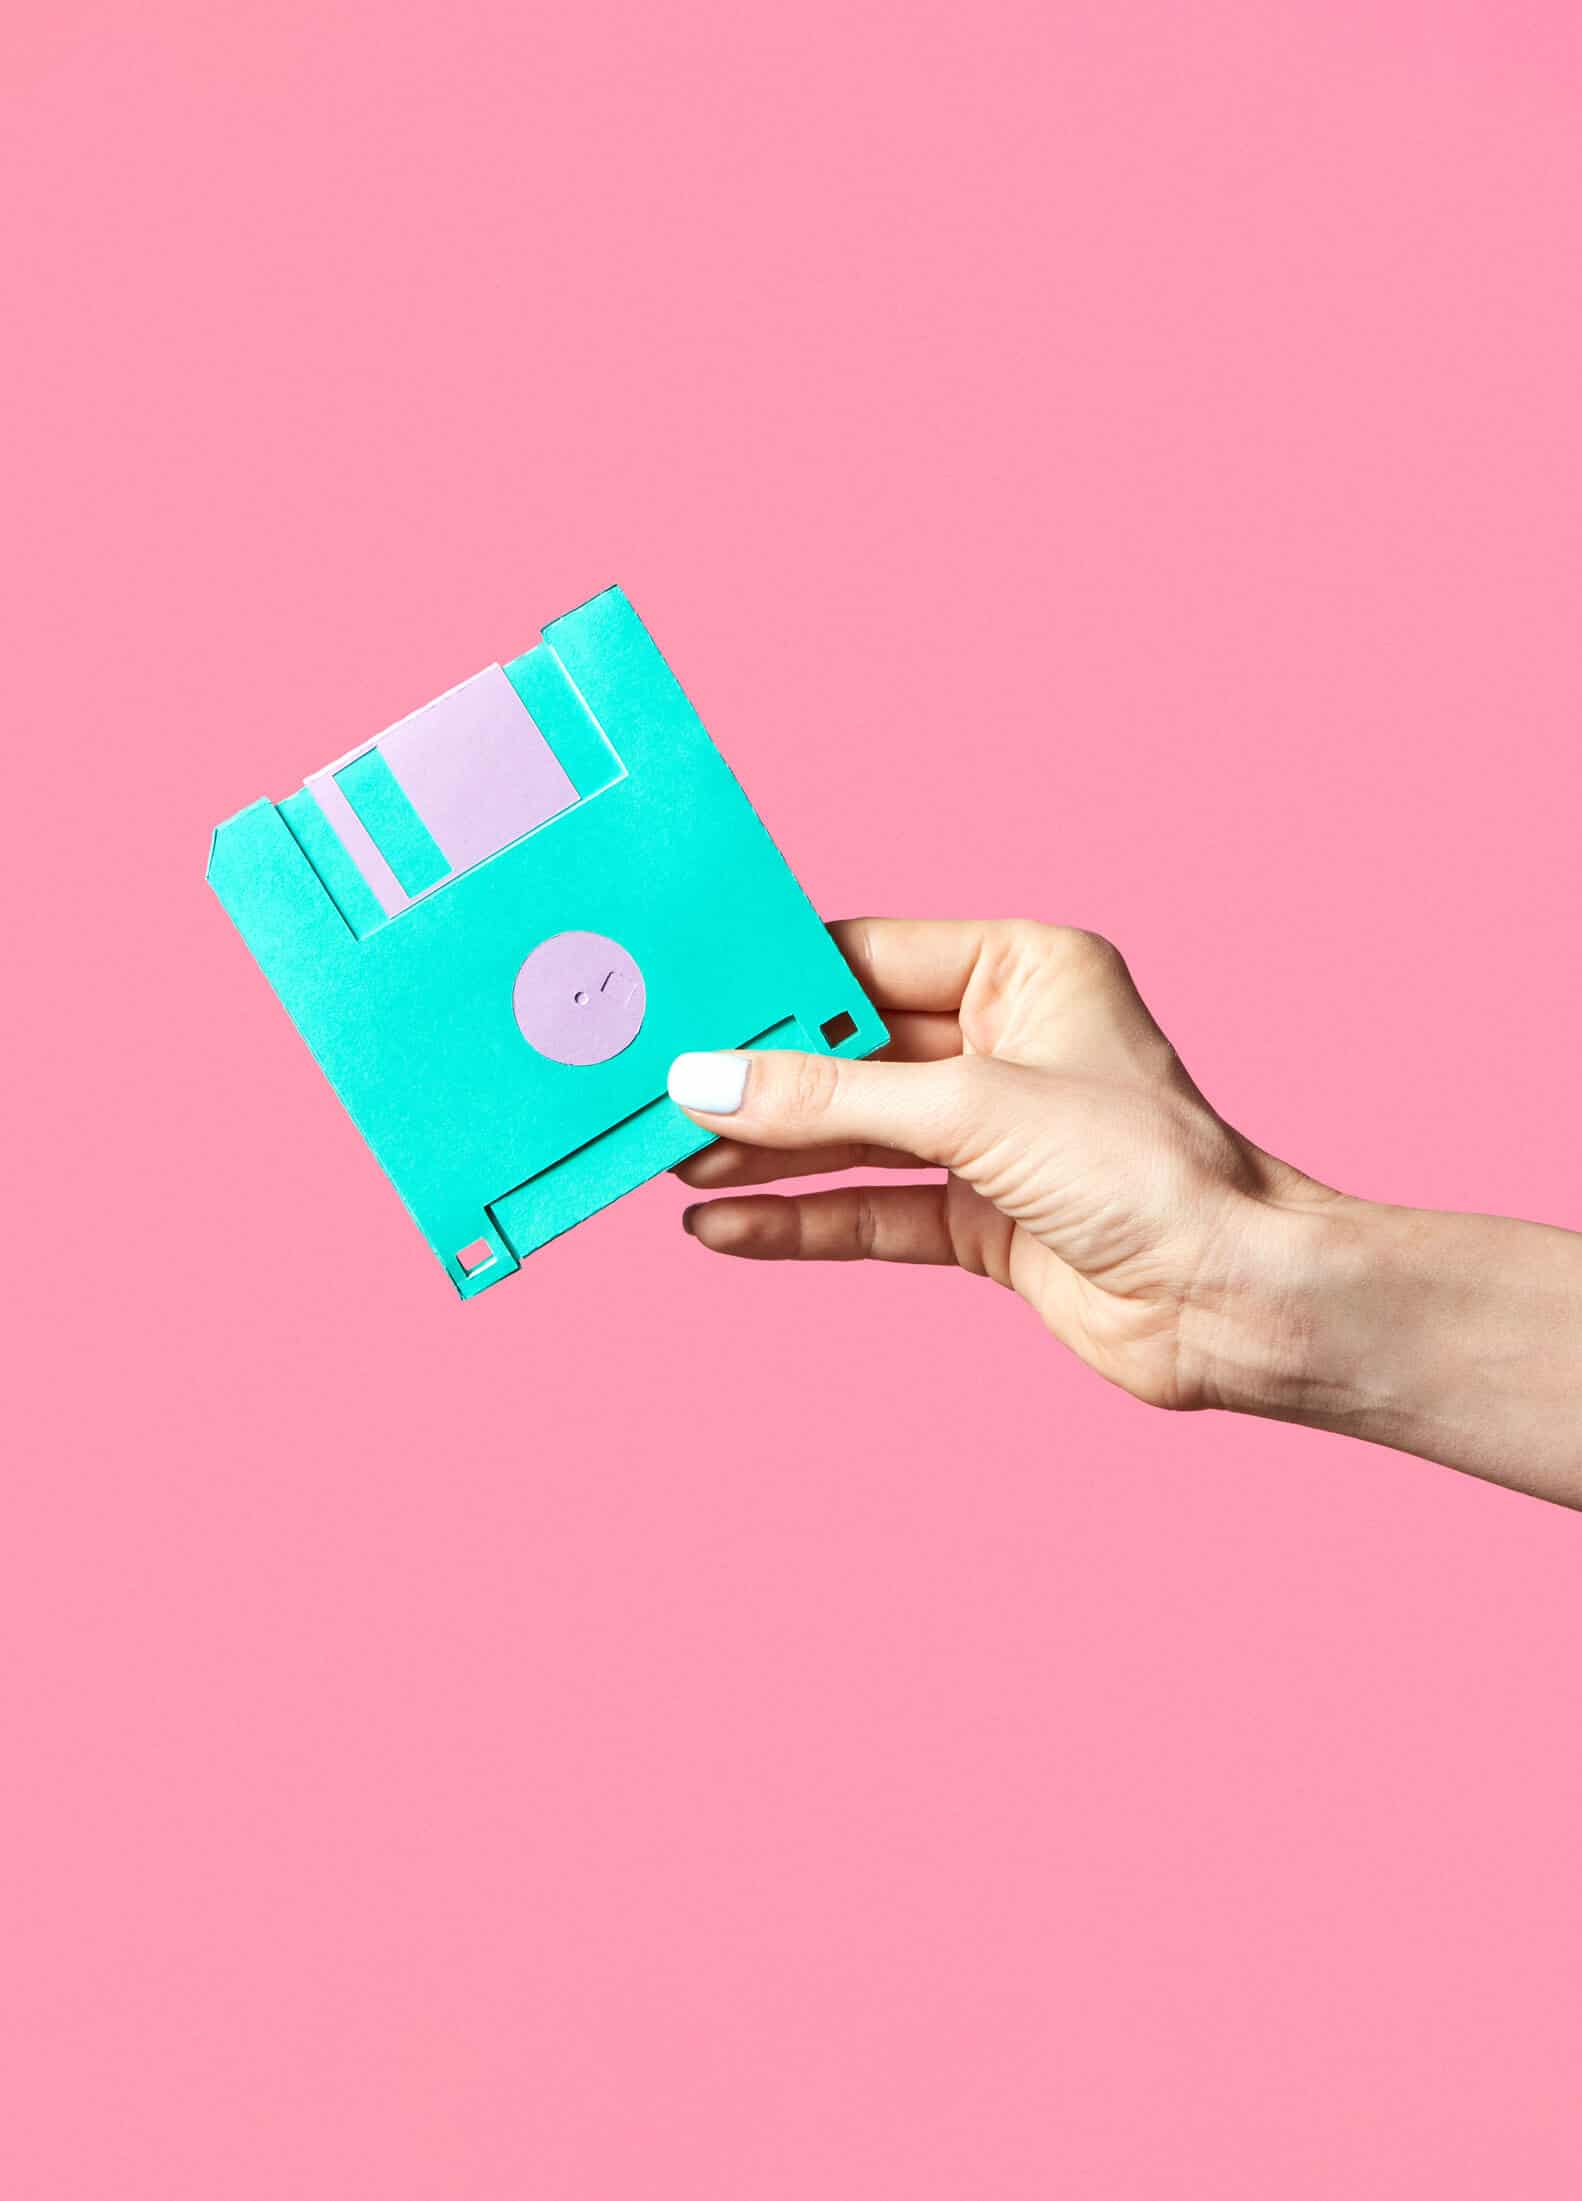 Isolated hand holding a floppy disk in front of a bright background